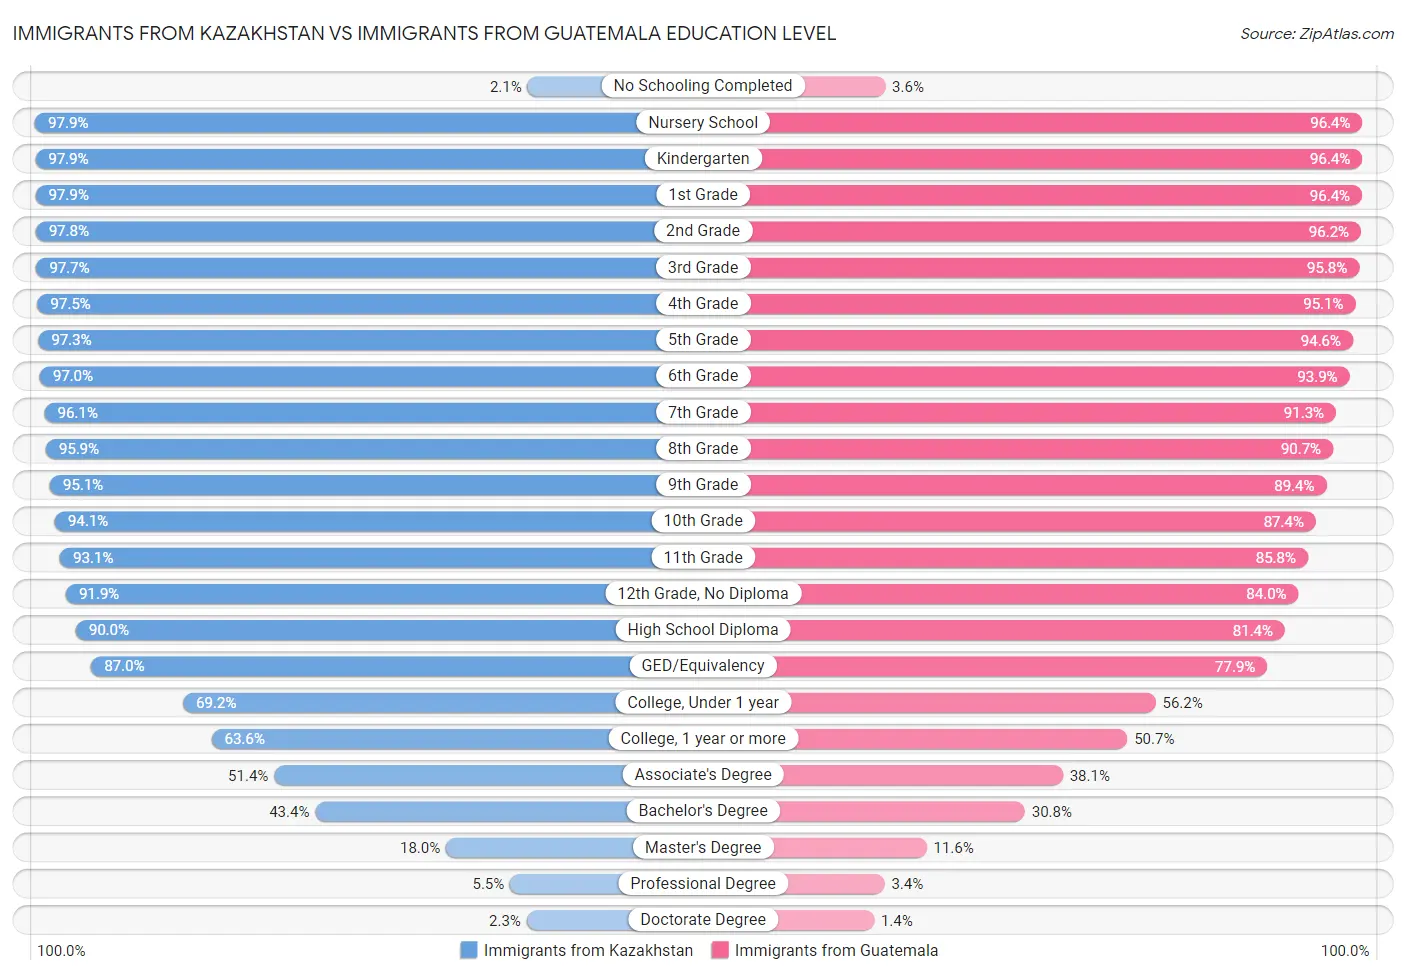 Immigrants from Kazakhstan vs Immigrants from Guatemala Education Level